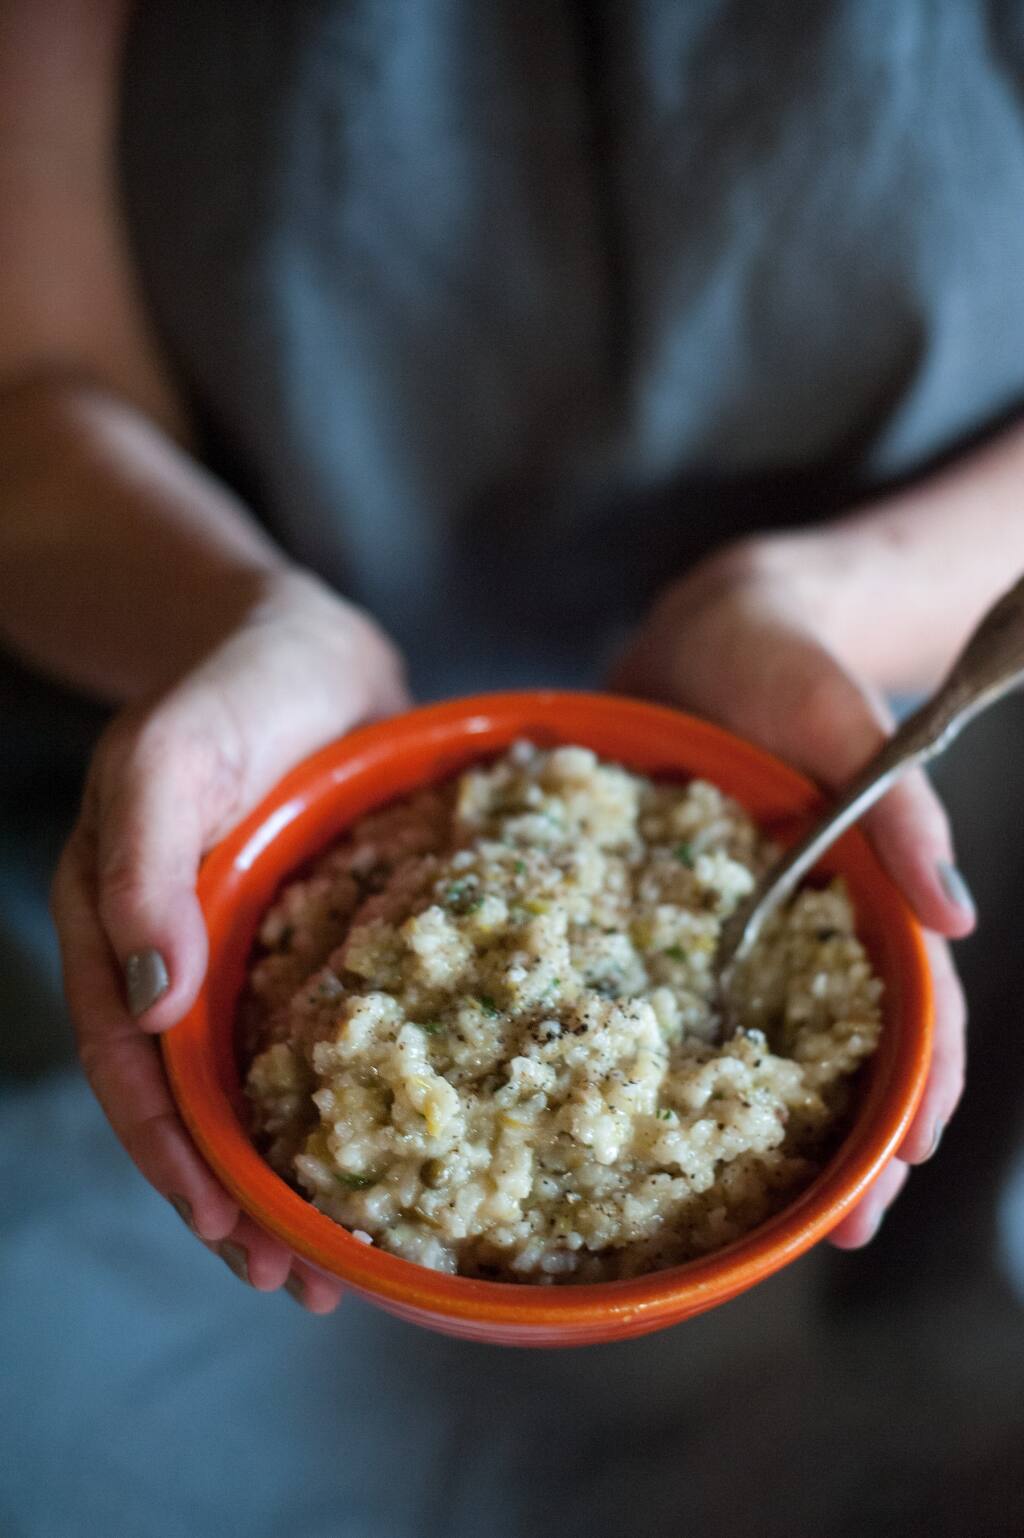 Risotto, from “The Good Cook’s Book of Salt & Pepper” (Liza Gershman)